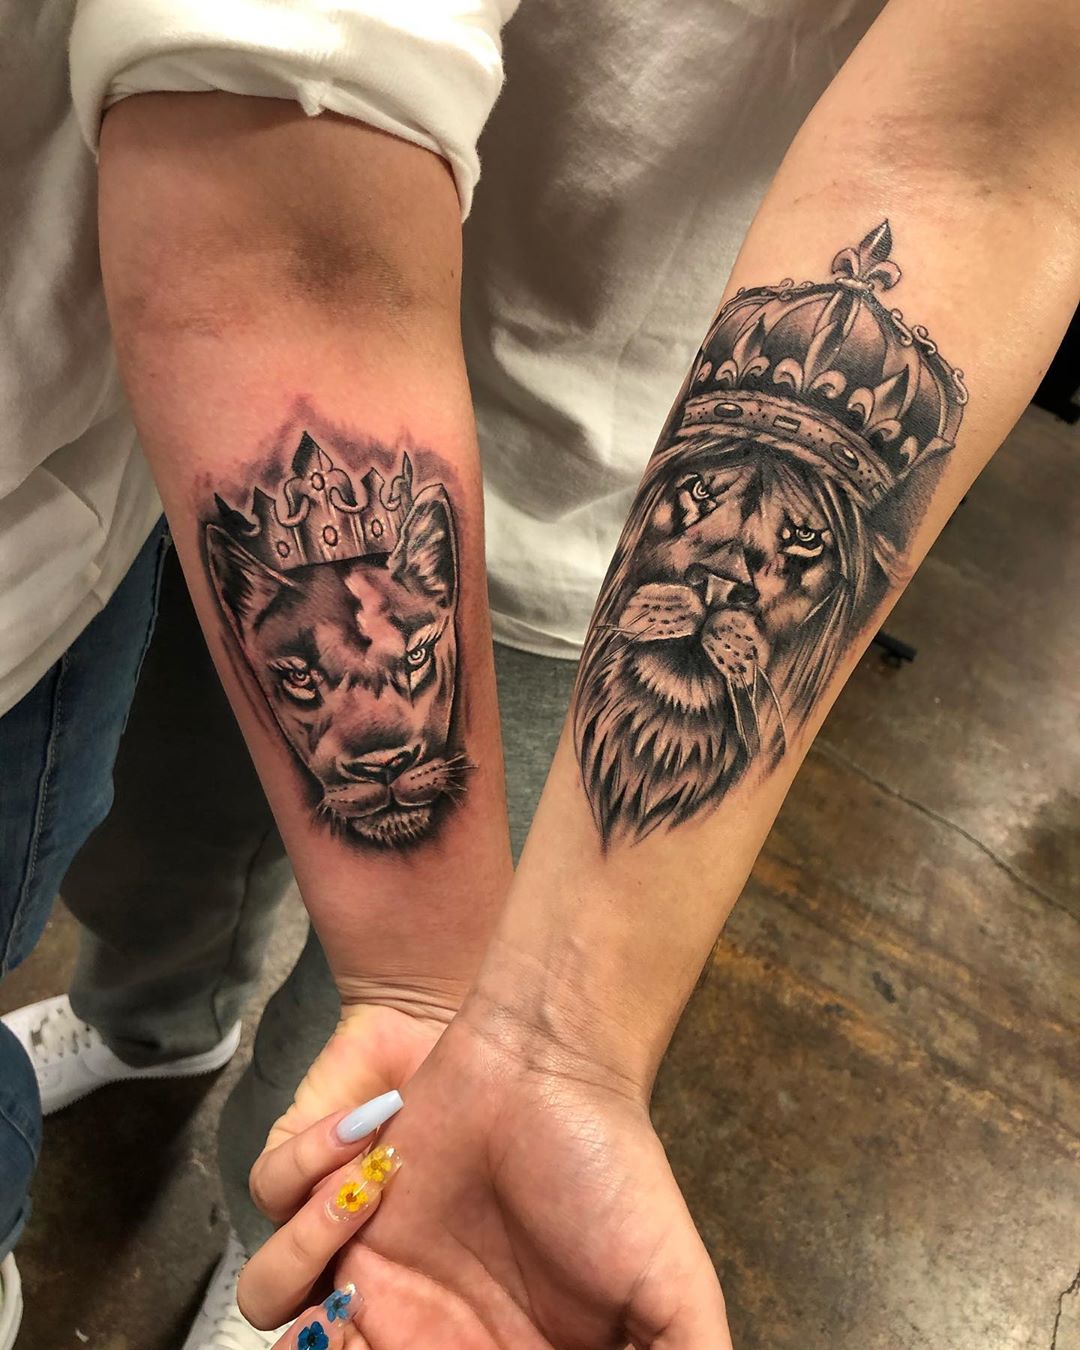 Red Ink Tattooos - Chess pieces ♟ couples tattoo Tattoo by @sagar_omi For  more couple tattoo ideas & concepts please visit our studio. Let us know 🙂  comments section below ⏬, we